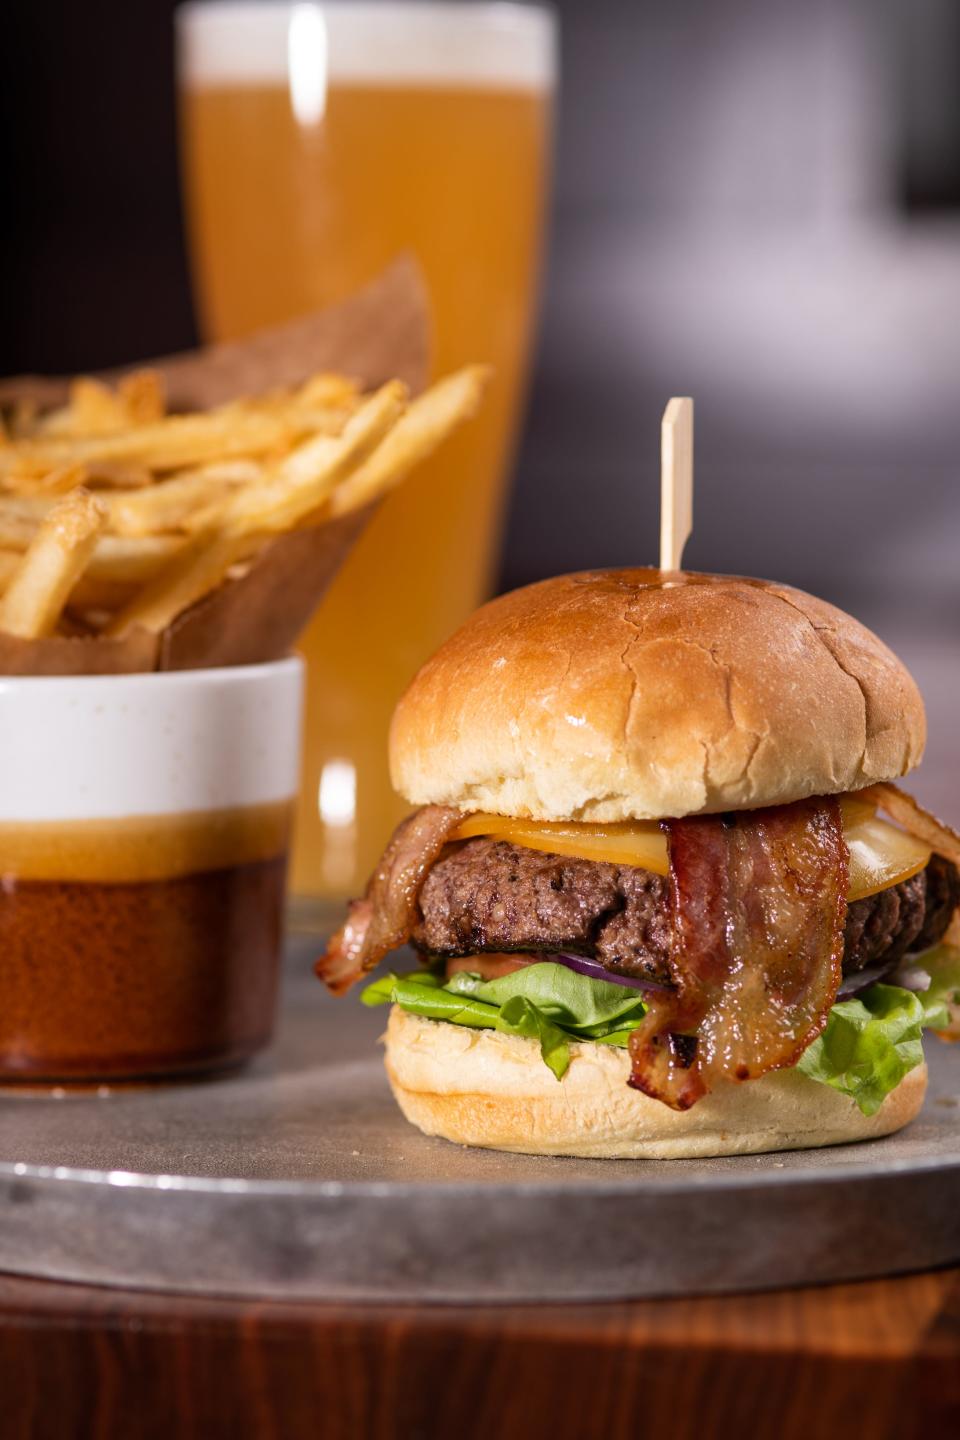 The farm to table burger at Maggie McFly's includes grass-fed beef from Lakeland, Fl, applewood smoked bacon, pickles from Pompano Beach, red onion, gouda, tomato, and bibb lettuce from Hardee on a potato bun.